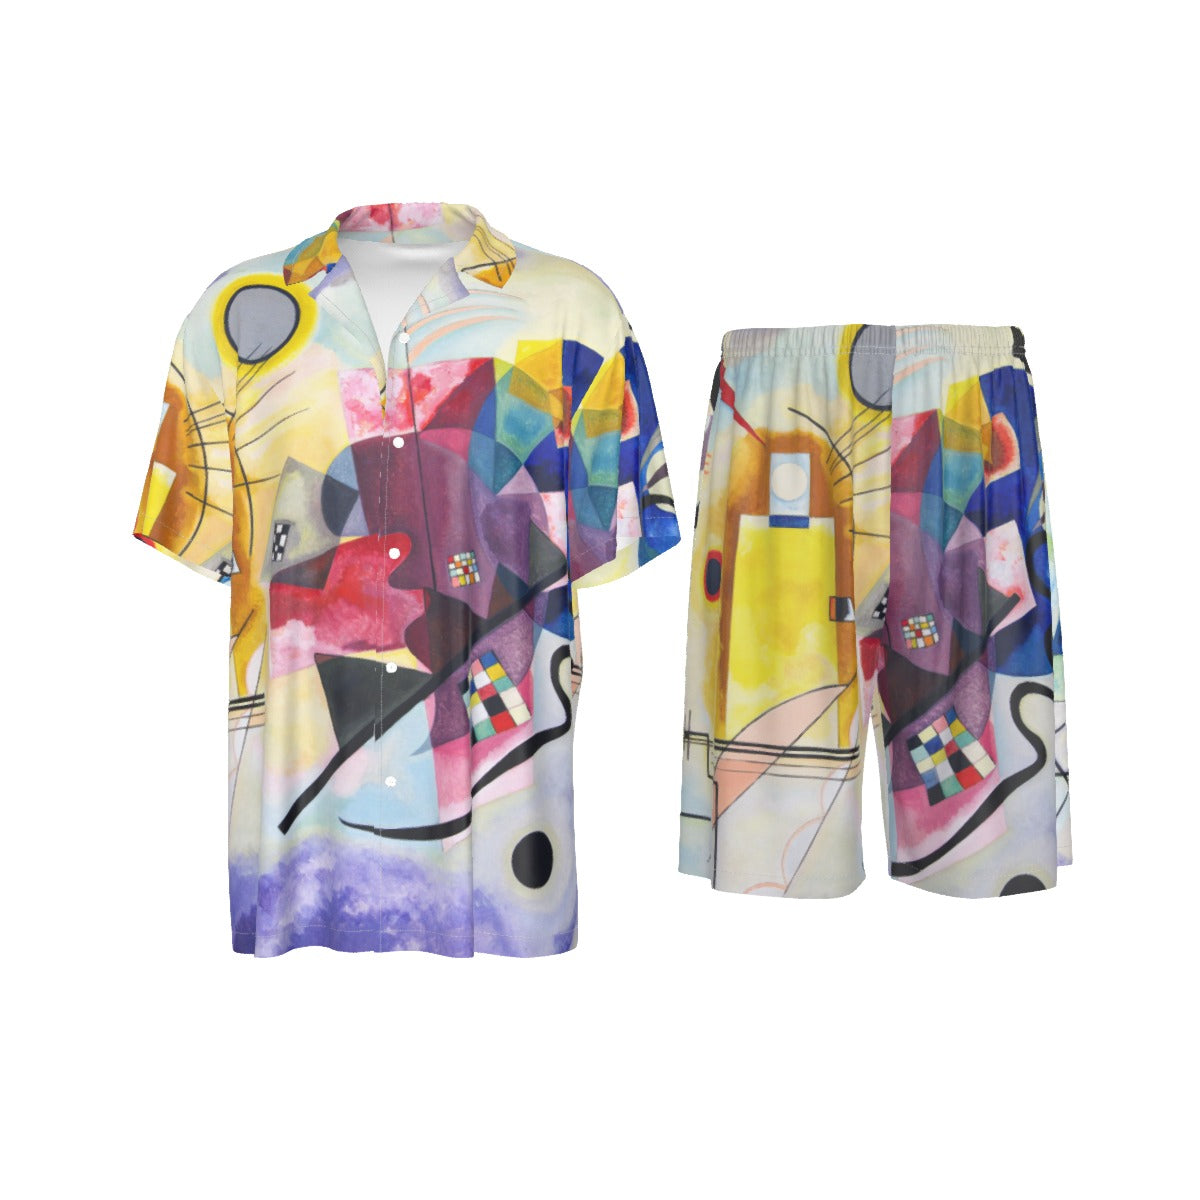 Abstract Art Silk Shirt Suit inspired by Wassily Kandinsky's Yellow-Red-Blue